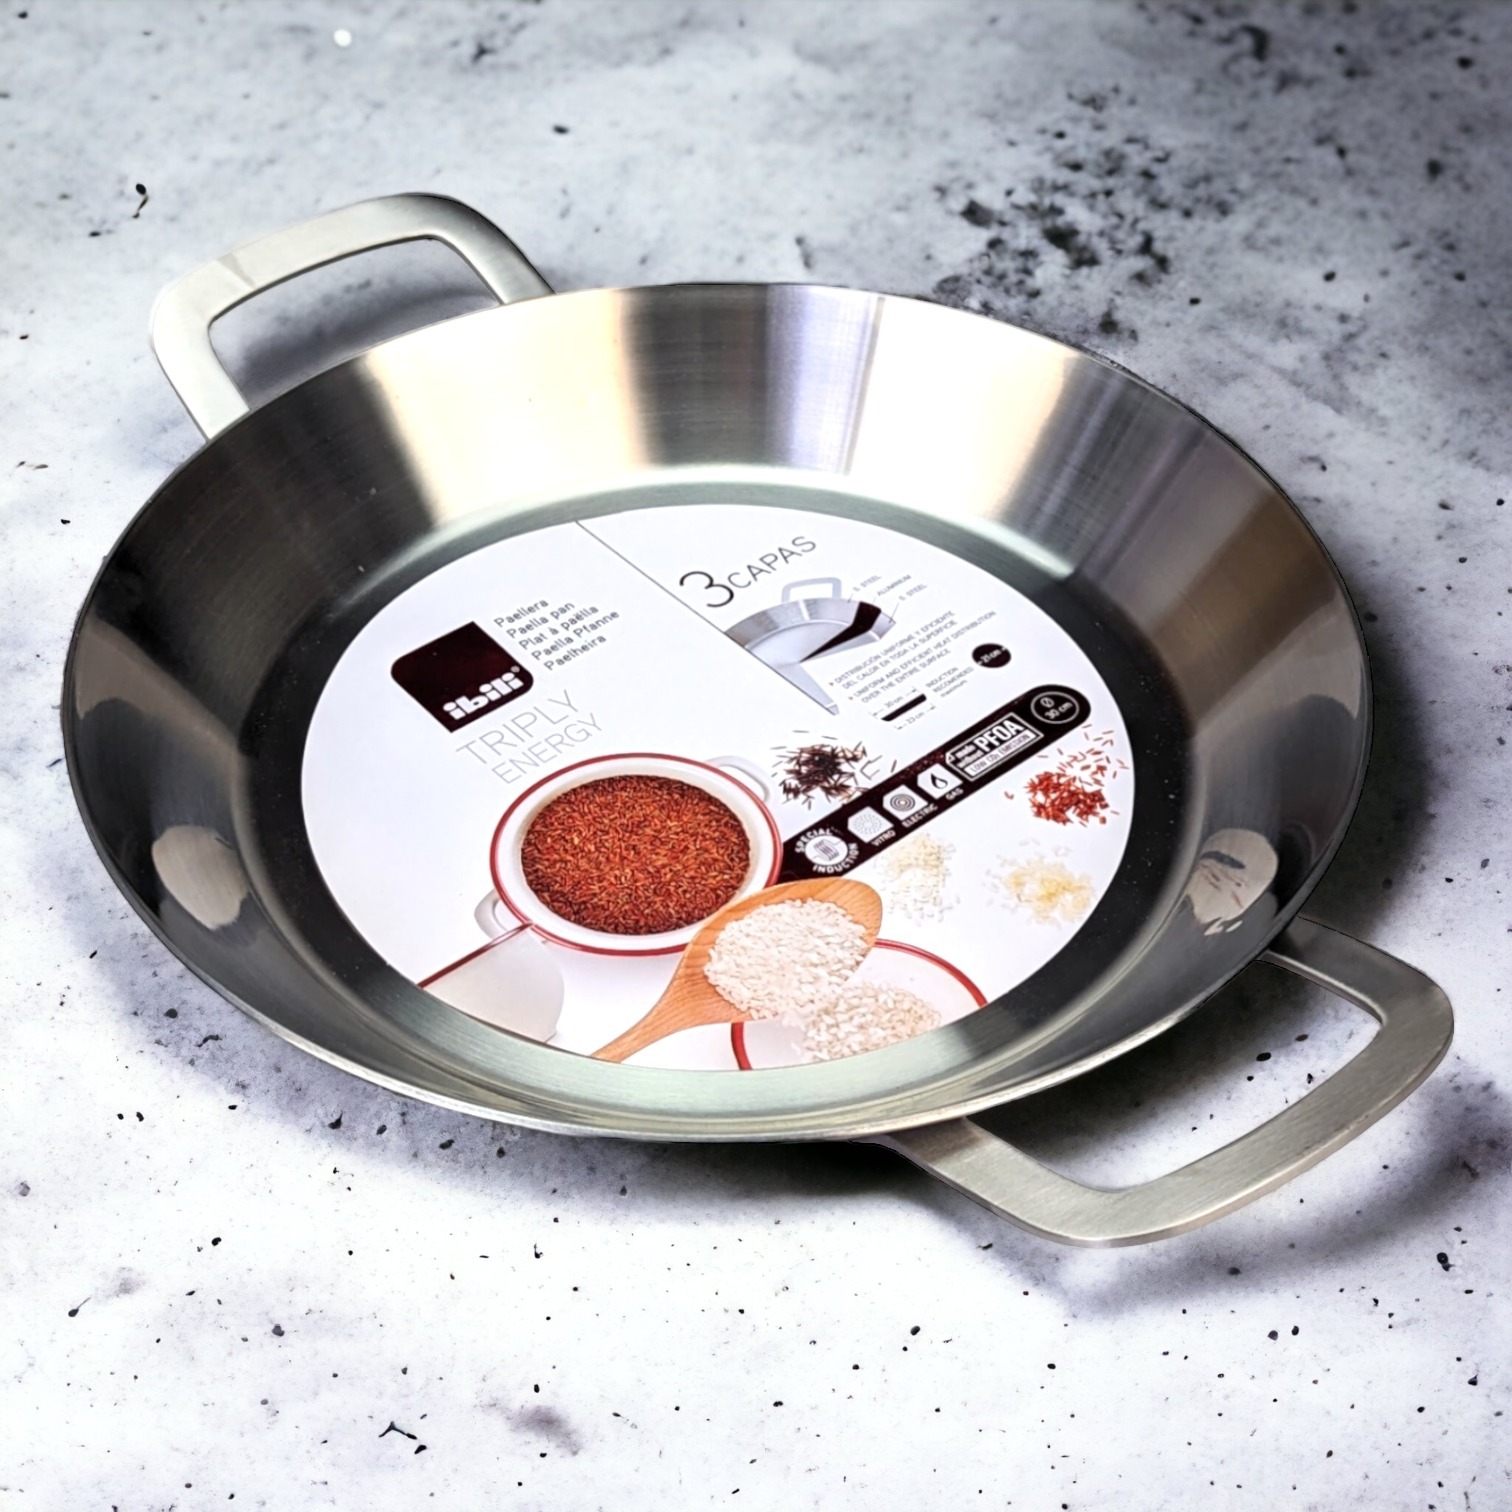 30cm Ibili ''Triply'' Stainless Steel Paella Pan for Ceramic, Induction hobs & AGA's